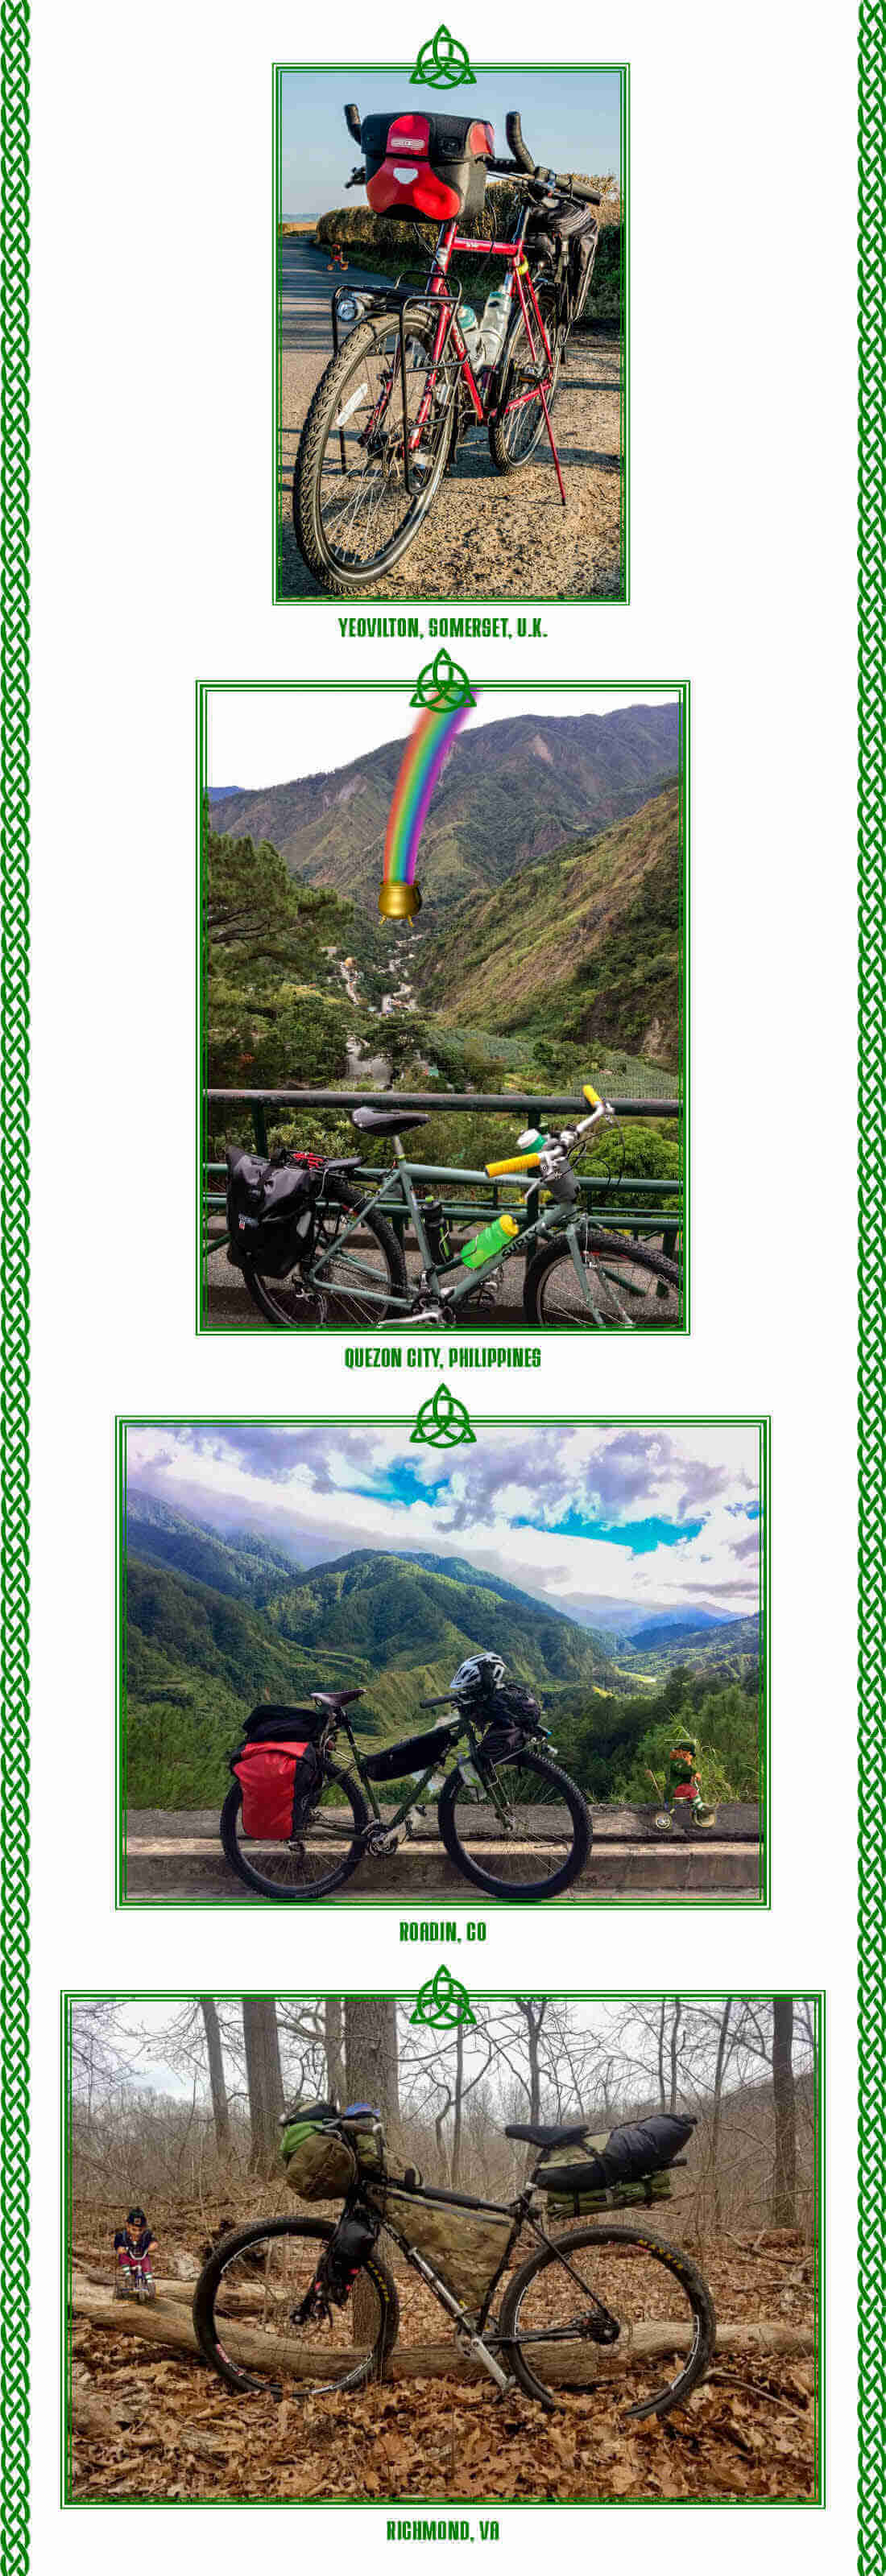 Multiple images of Surly bikes, with their specific location shown below each image